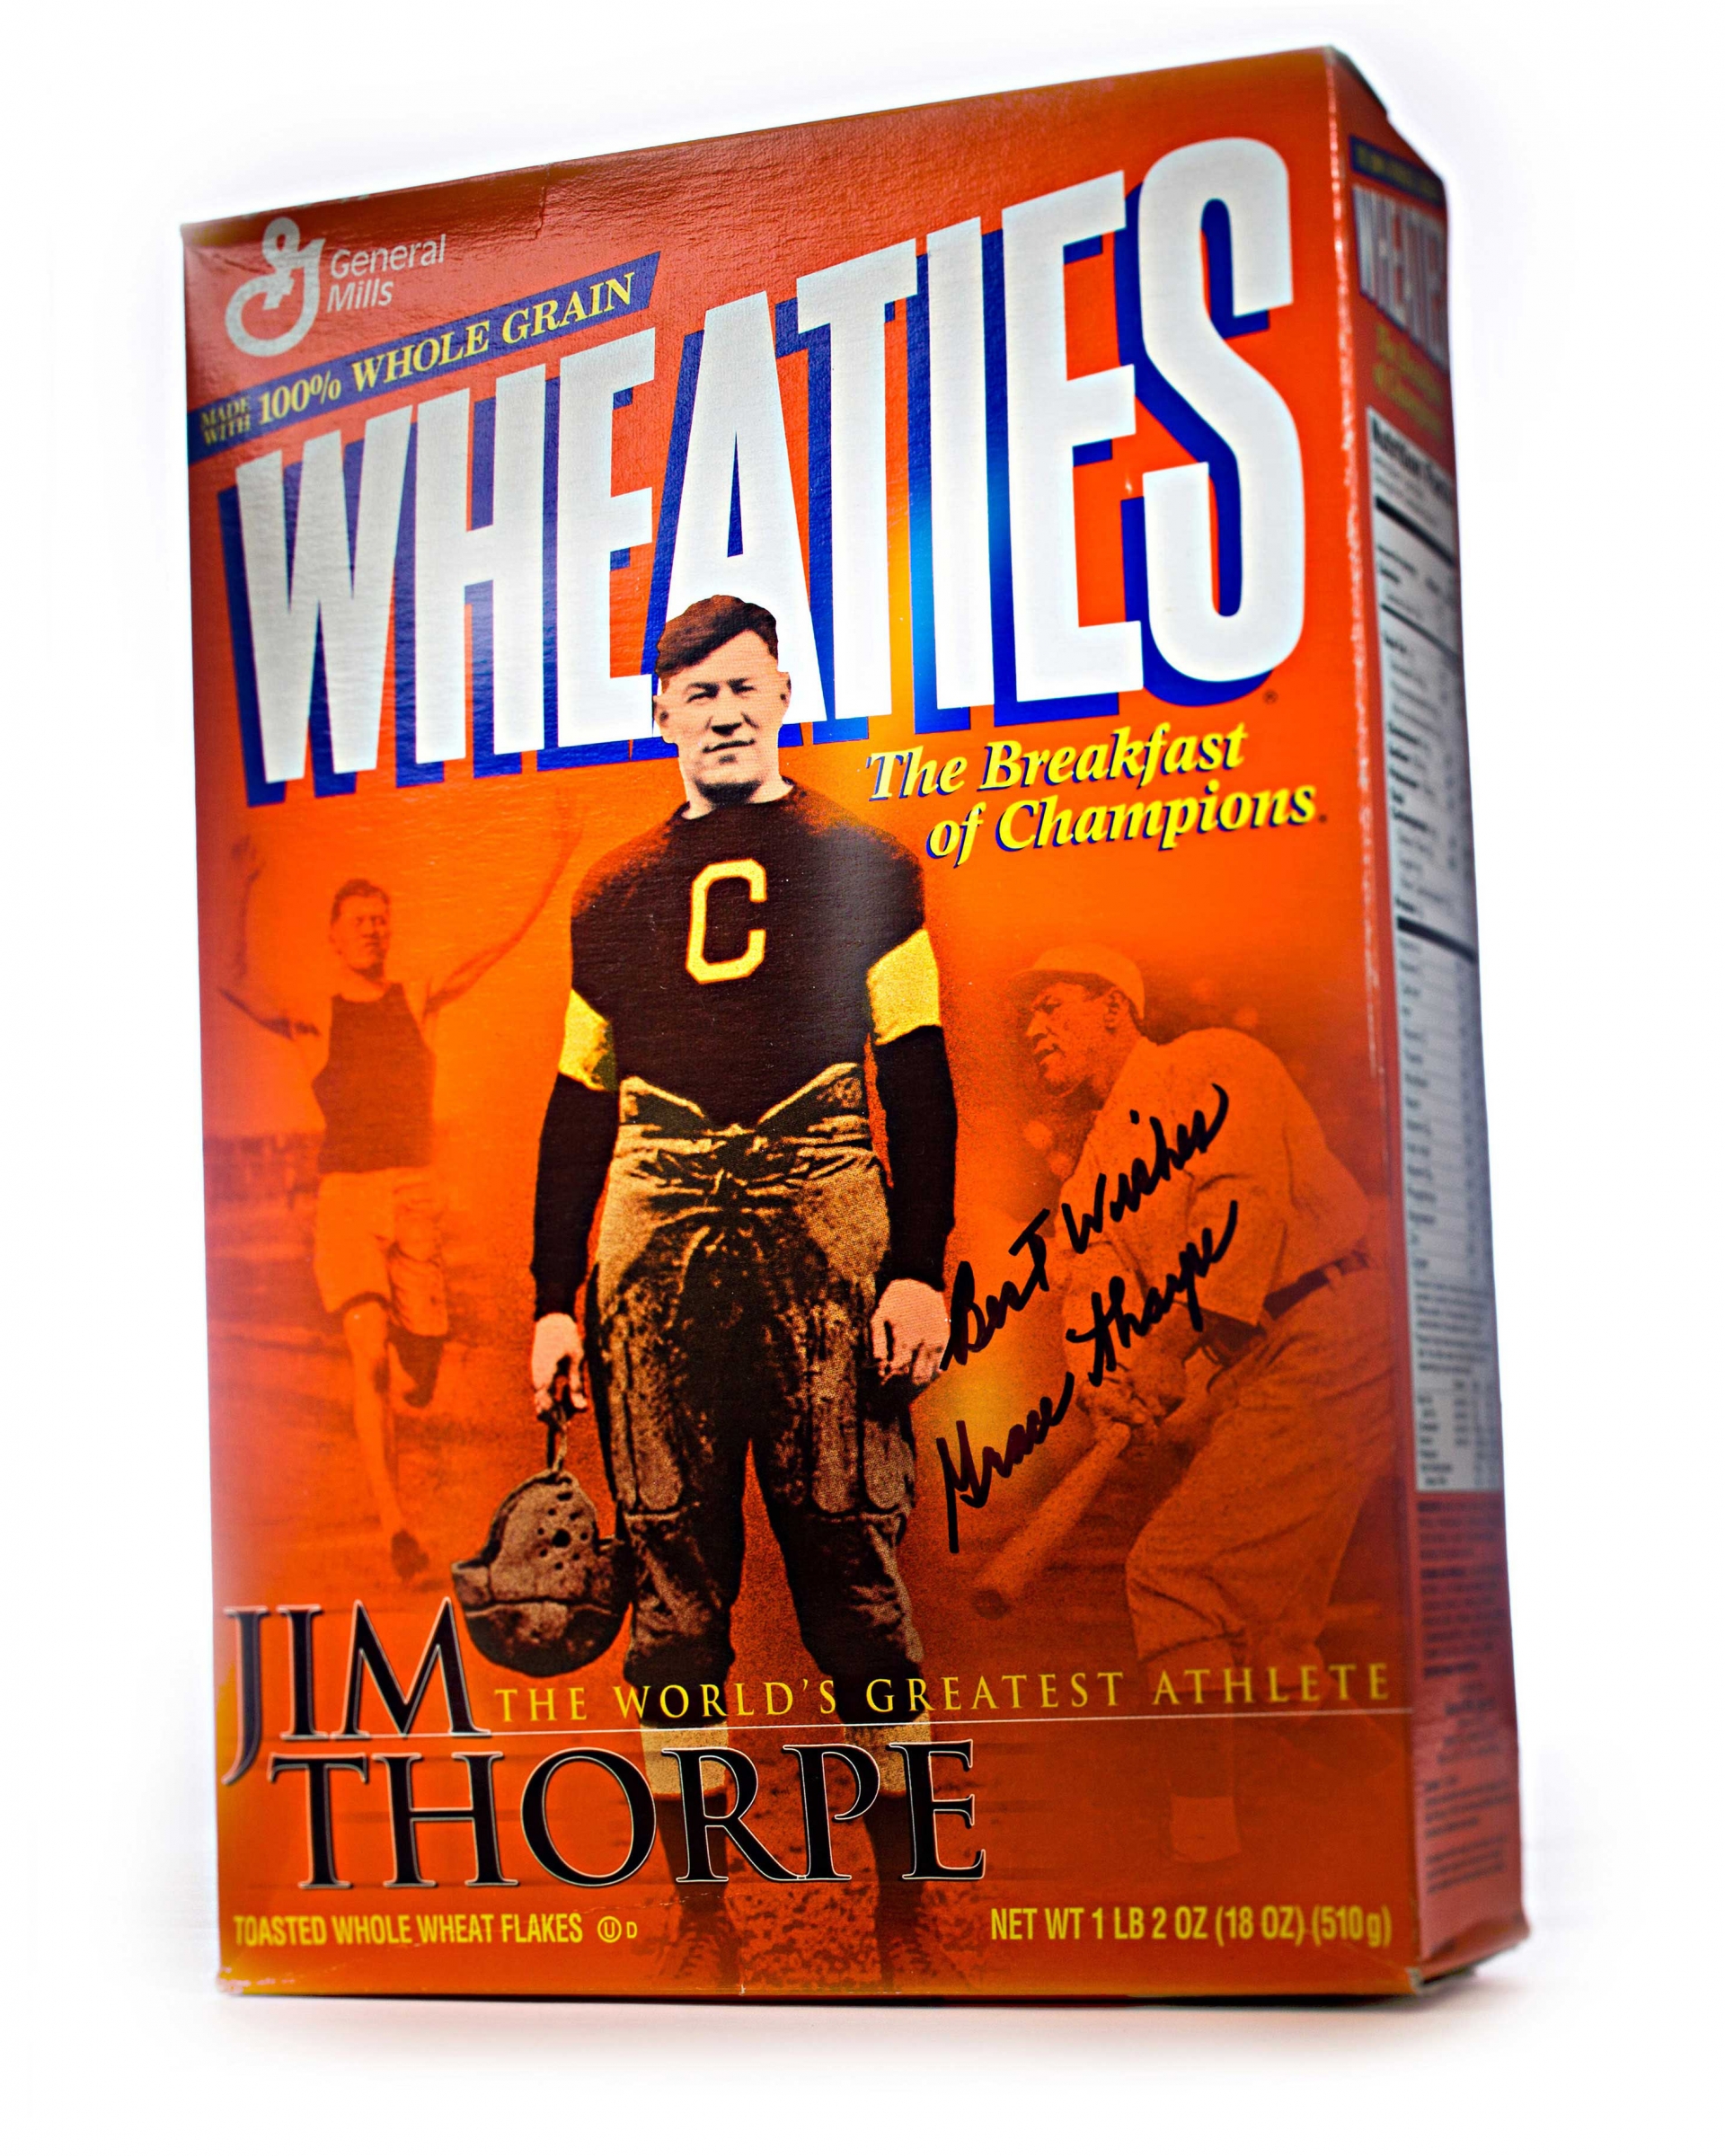 Wheaties box with a photo of Jim Thorpe on its front